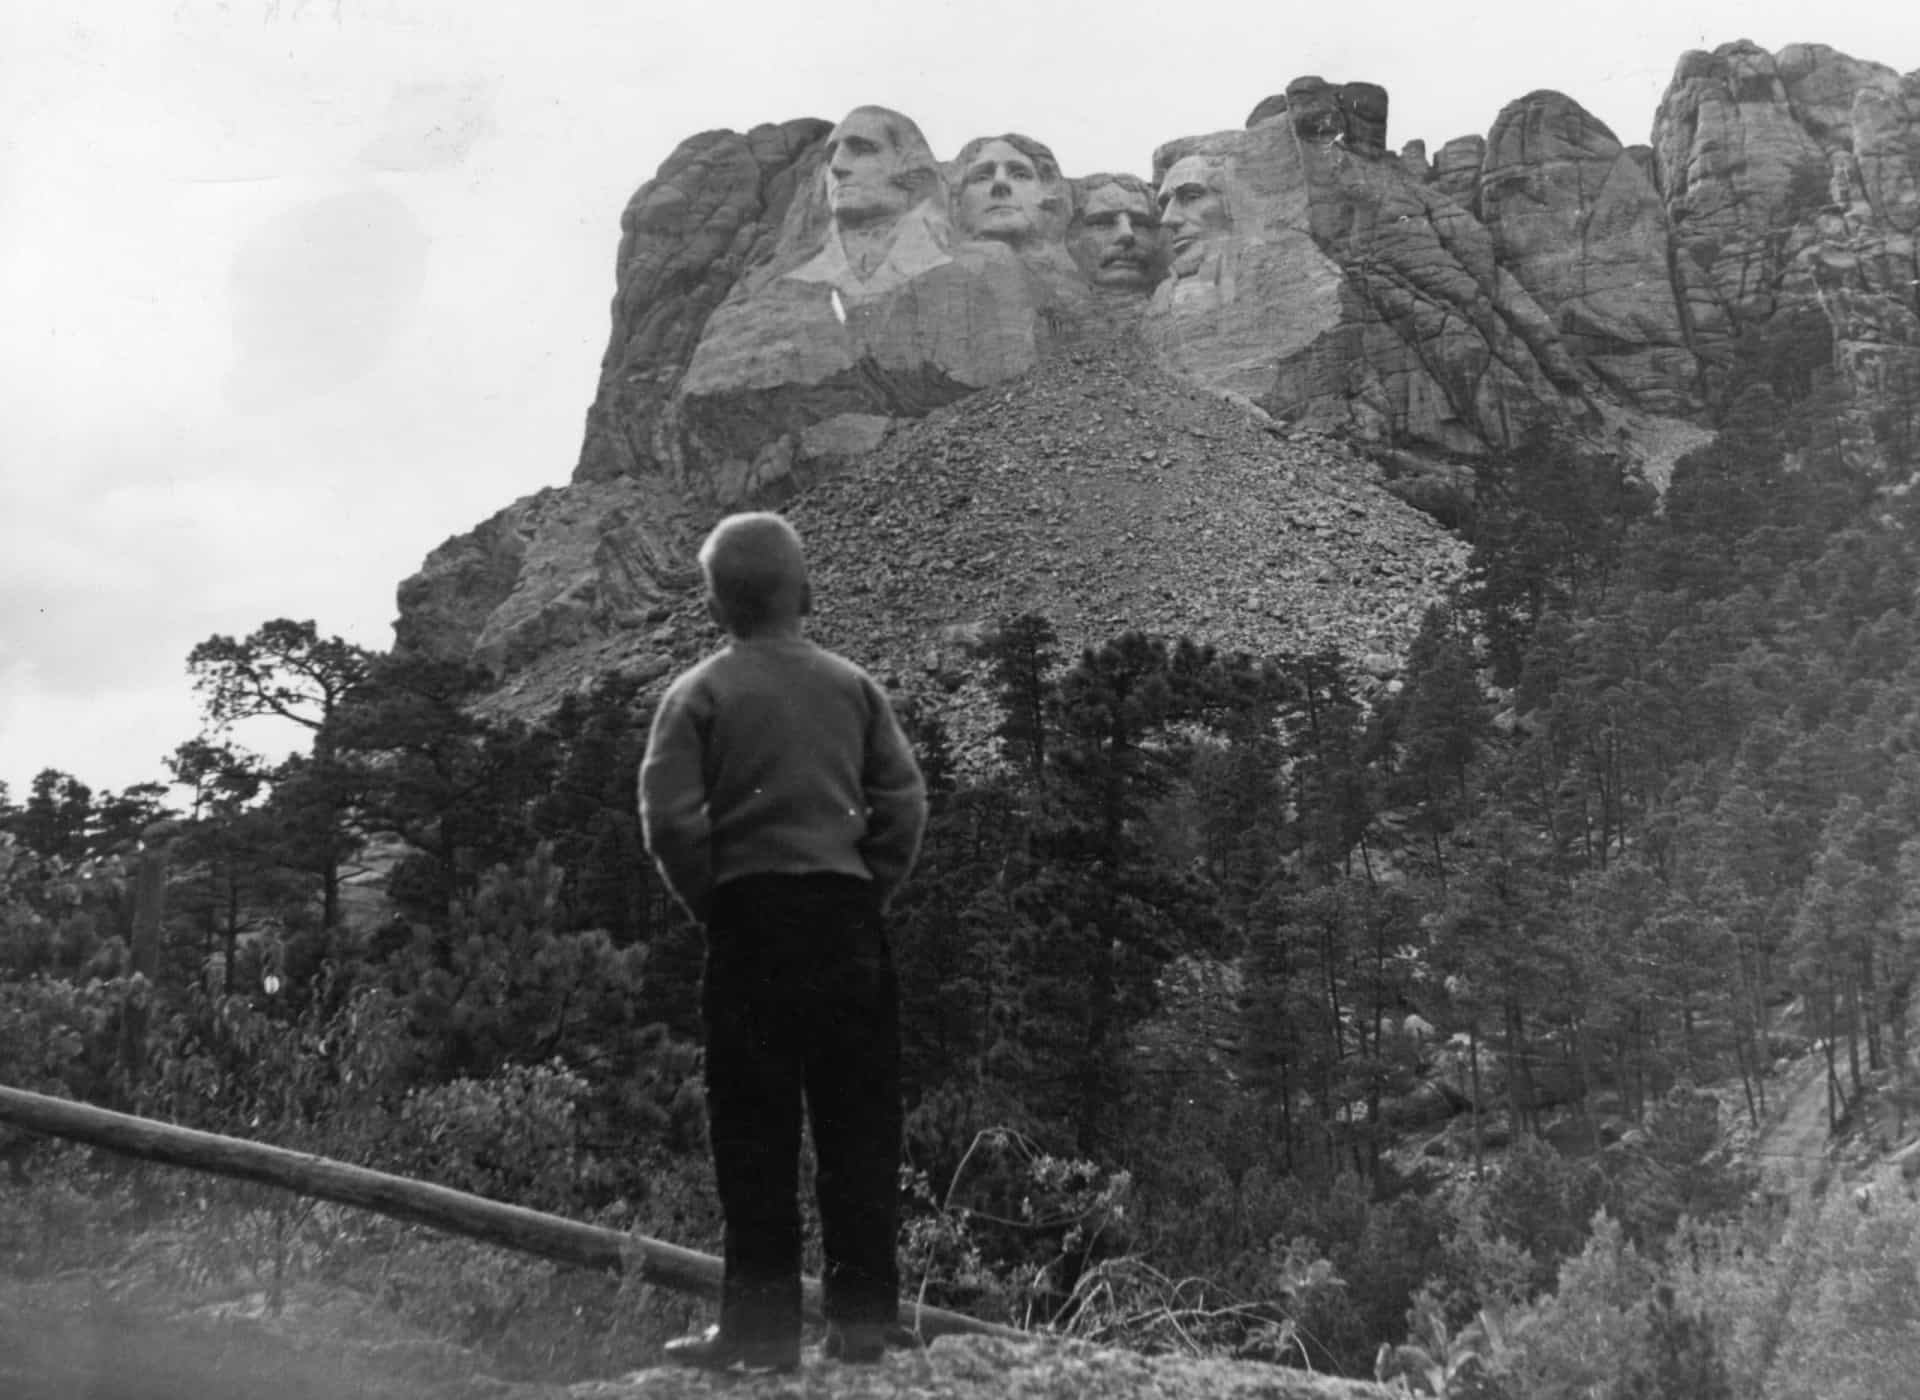 <p>Going on a road trip across the Midwest was a popular choice back then. Visiting places such as Mount Rushmore, Yellowstone River, and Old Faithful made the trip worthwhile. </p>